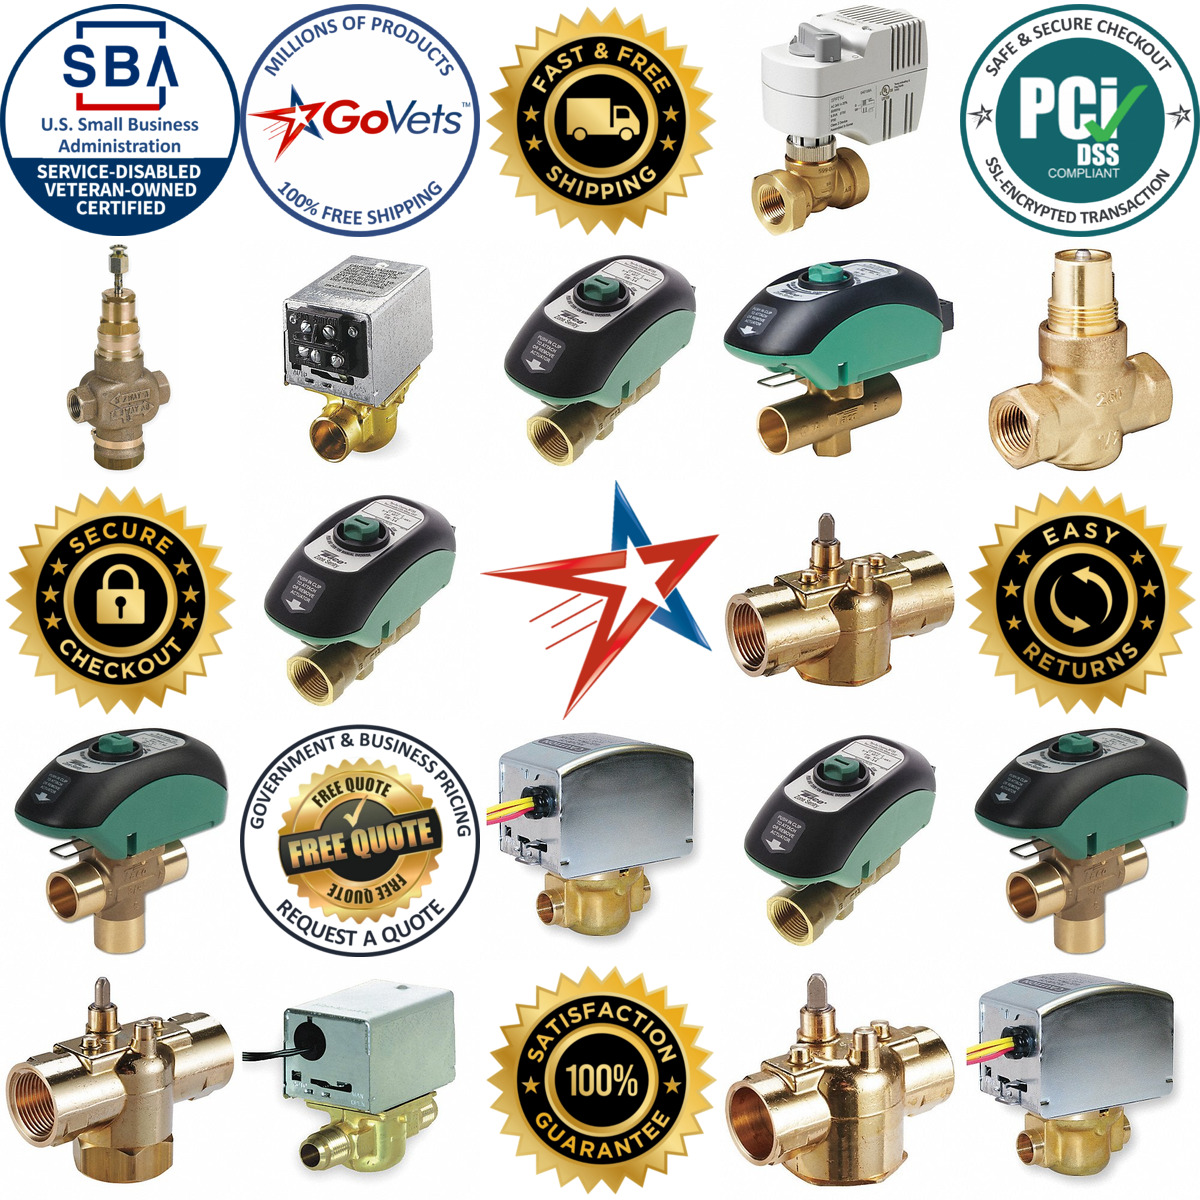 A selection of Zone Valves products on GoVets